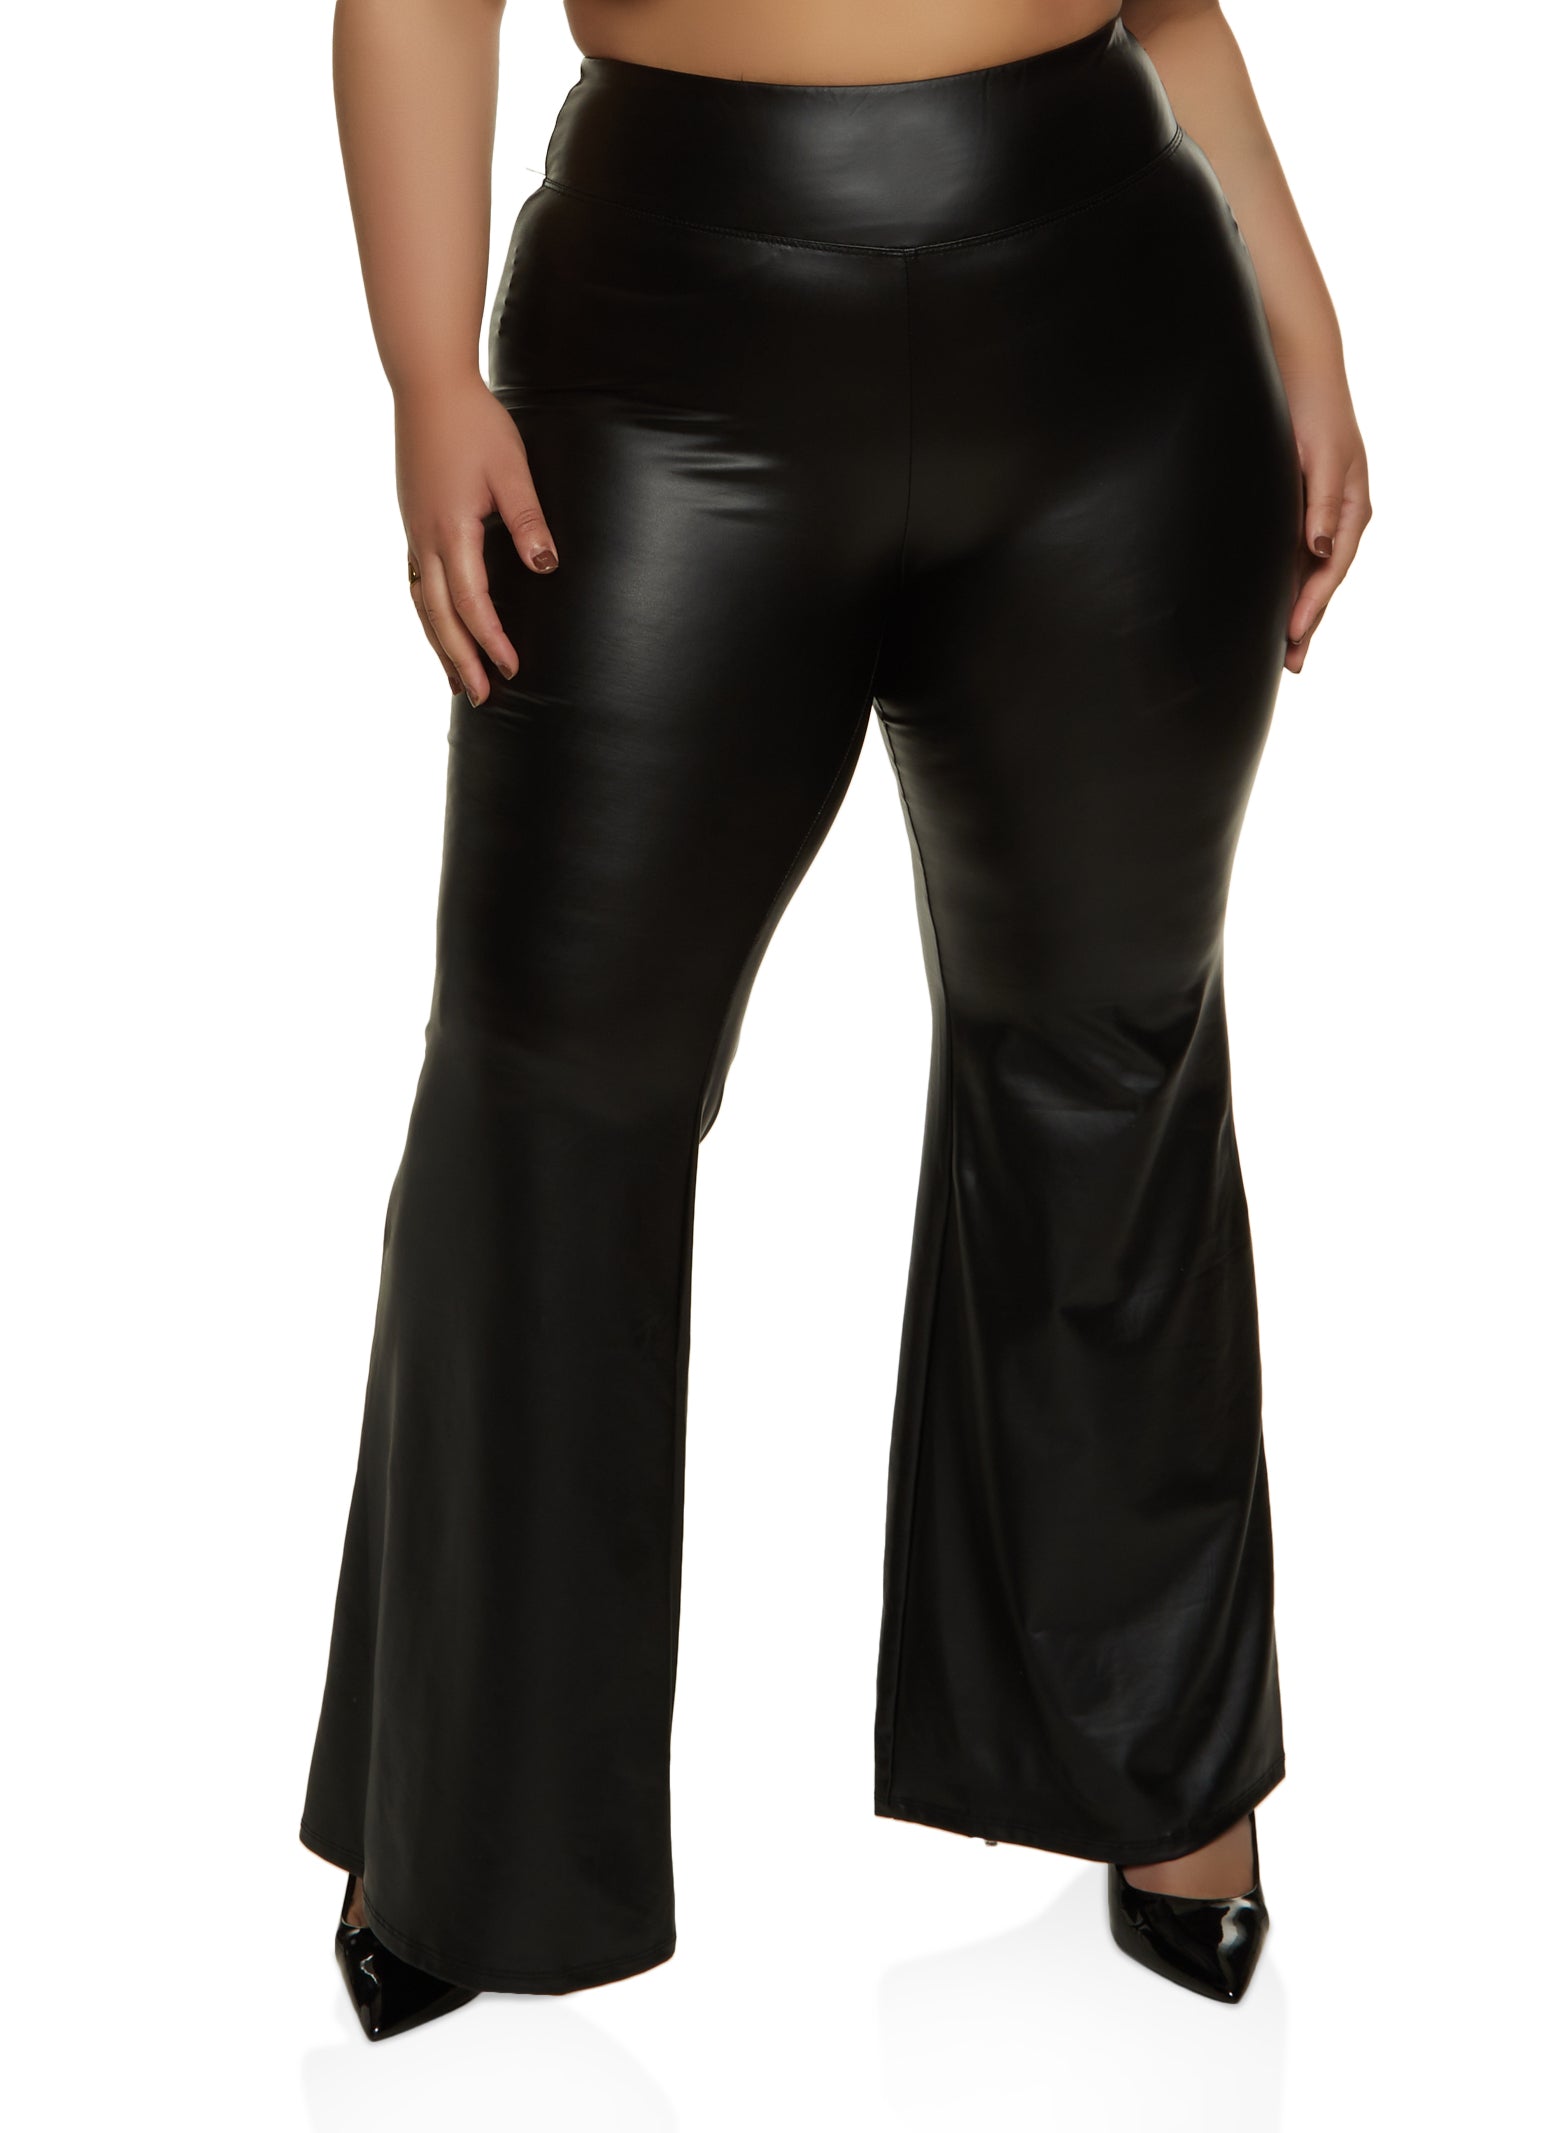 Plus Size Flare Pants, Everyday Low Prices